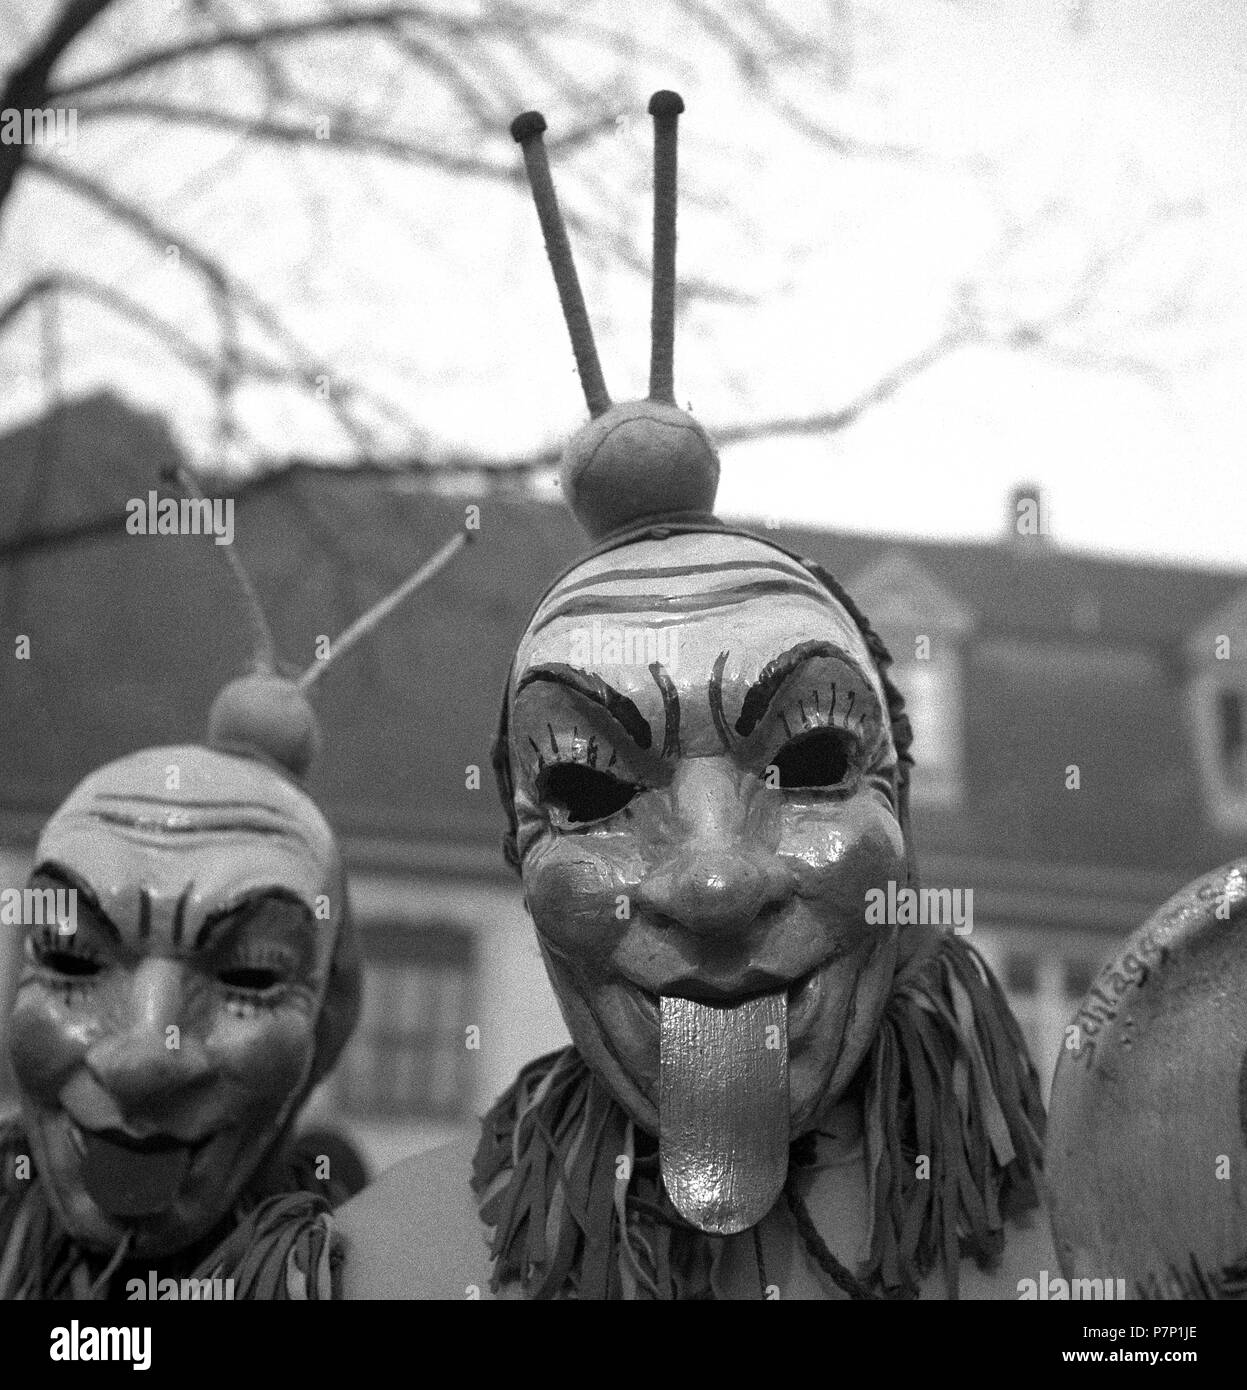 Men with mask stick their tongues out, carnival, around 1950, Freiburg, Germany Stock Photo